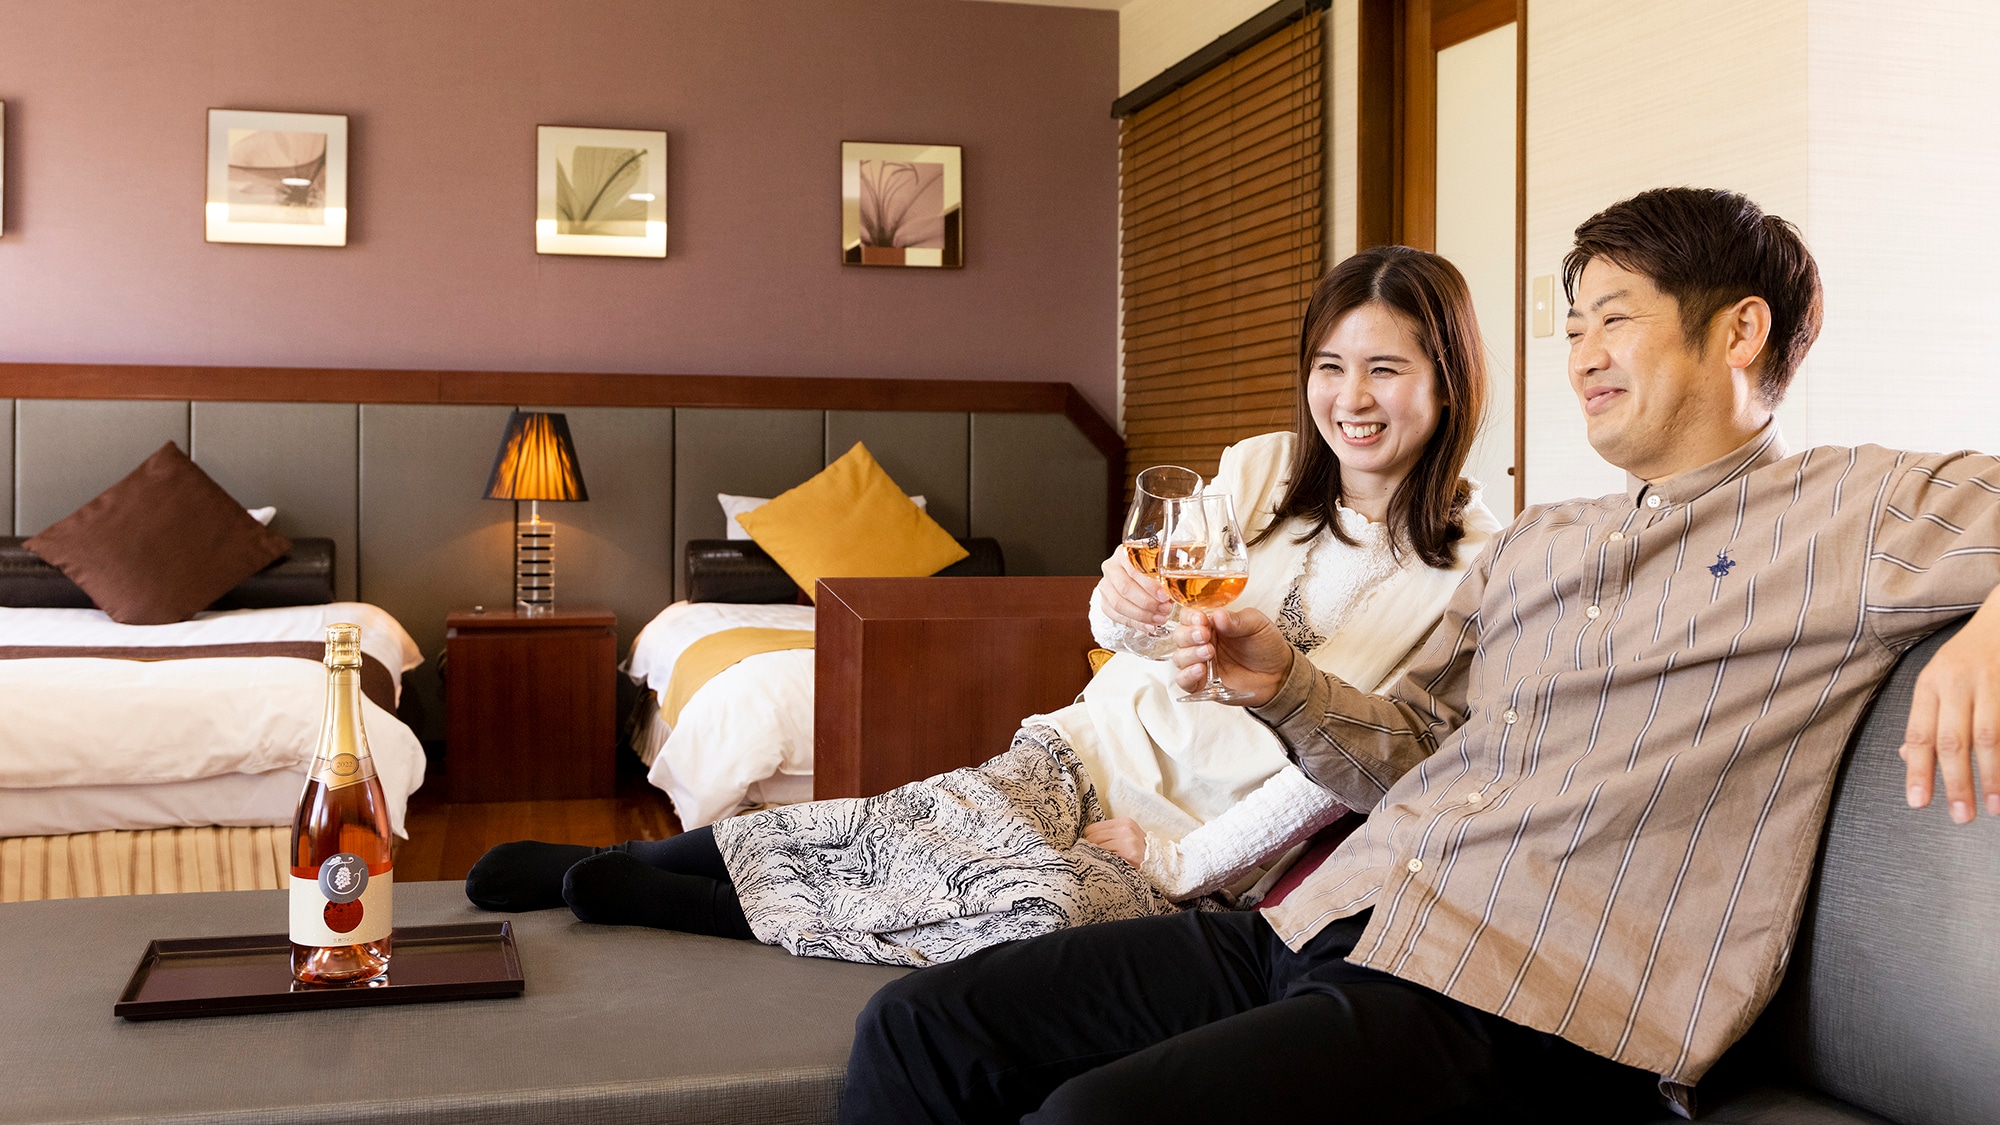 [DX Twin-Junior Suite] Enjoy a relaxing time just for the two of you in a room with a resort-like interior.